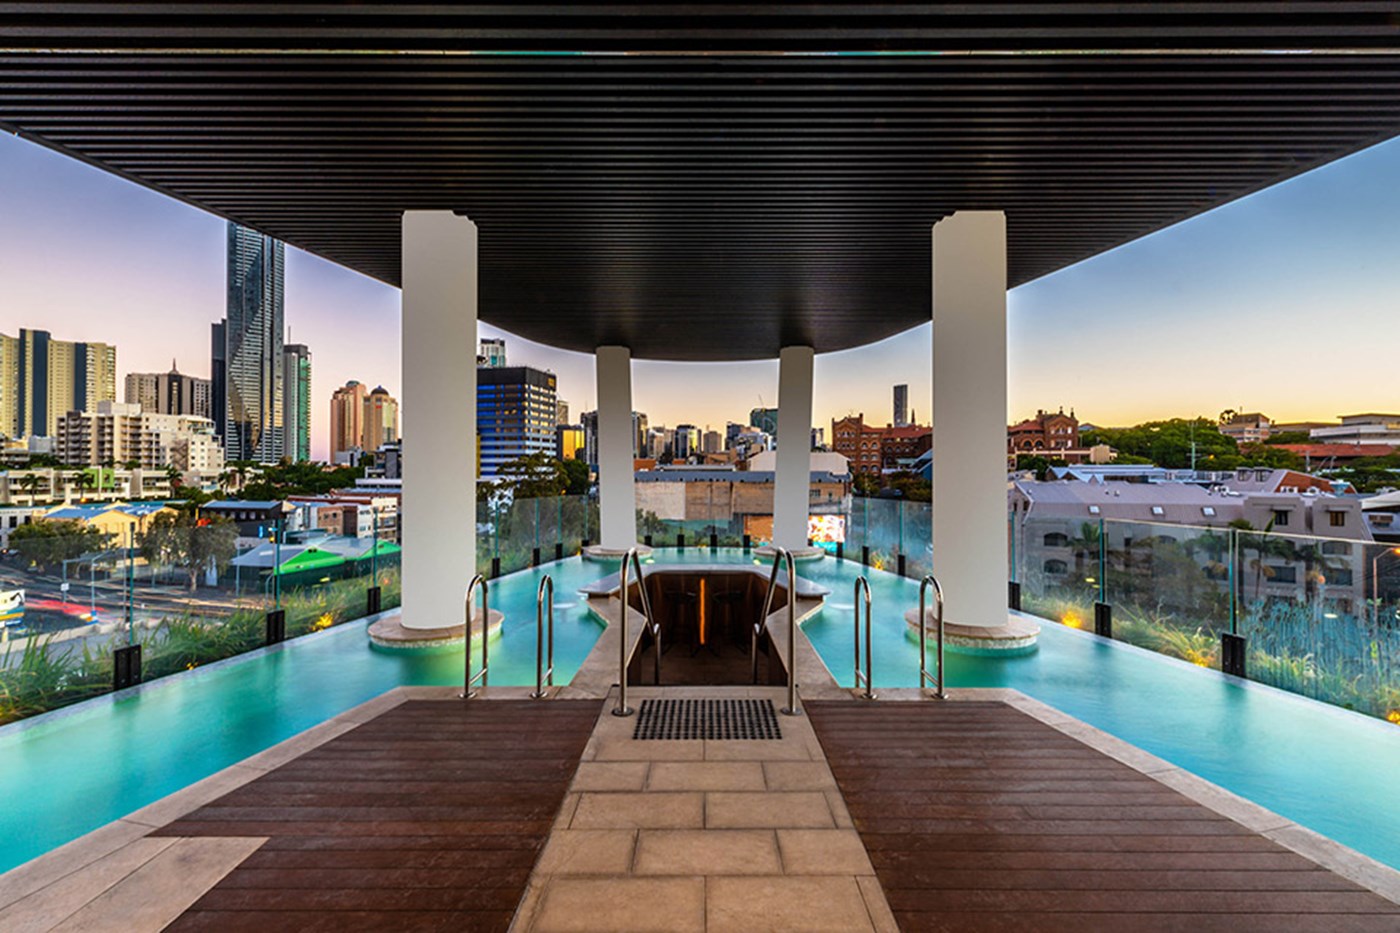 An infinity pool on a rooftop with large white pillars, surround by views of the city skyline.